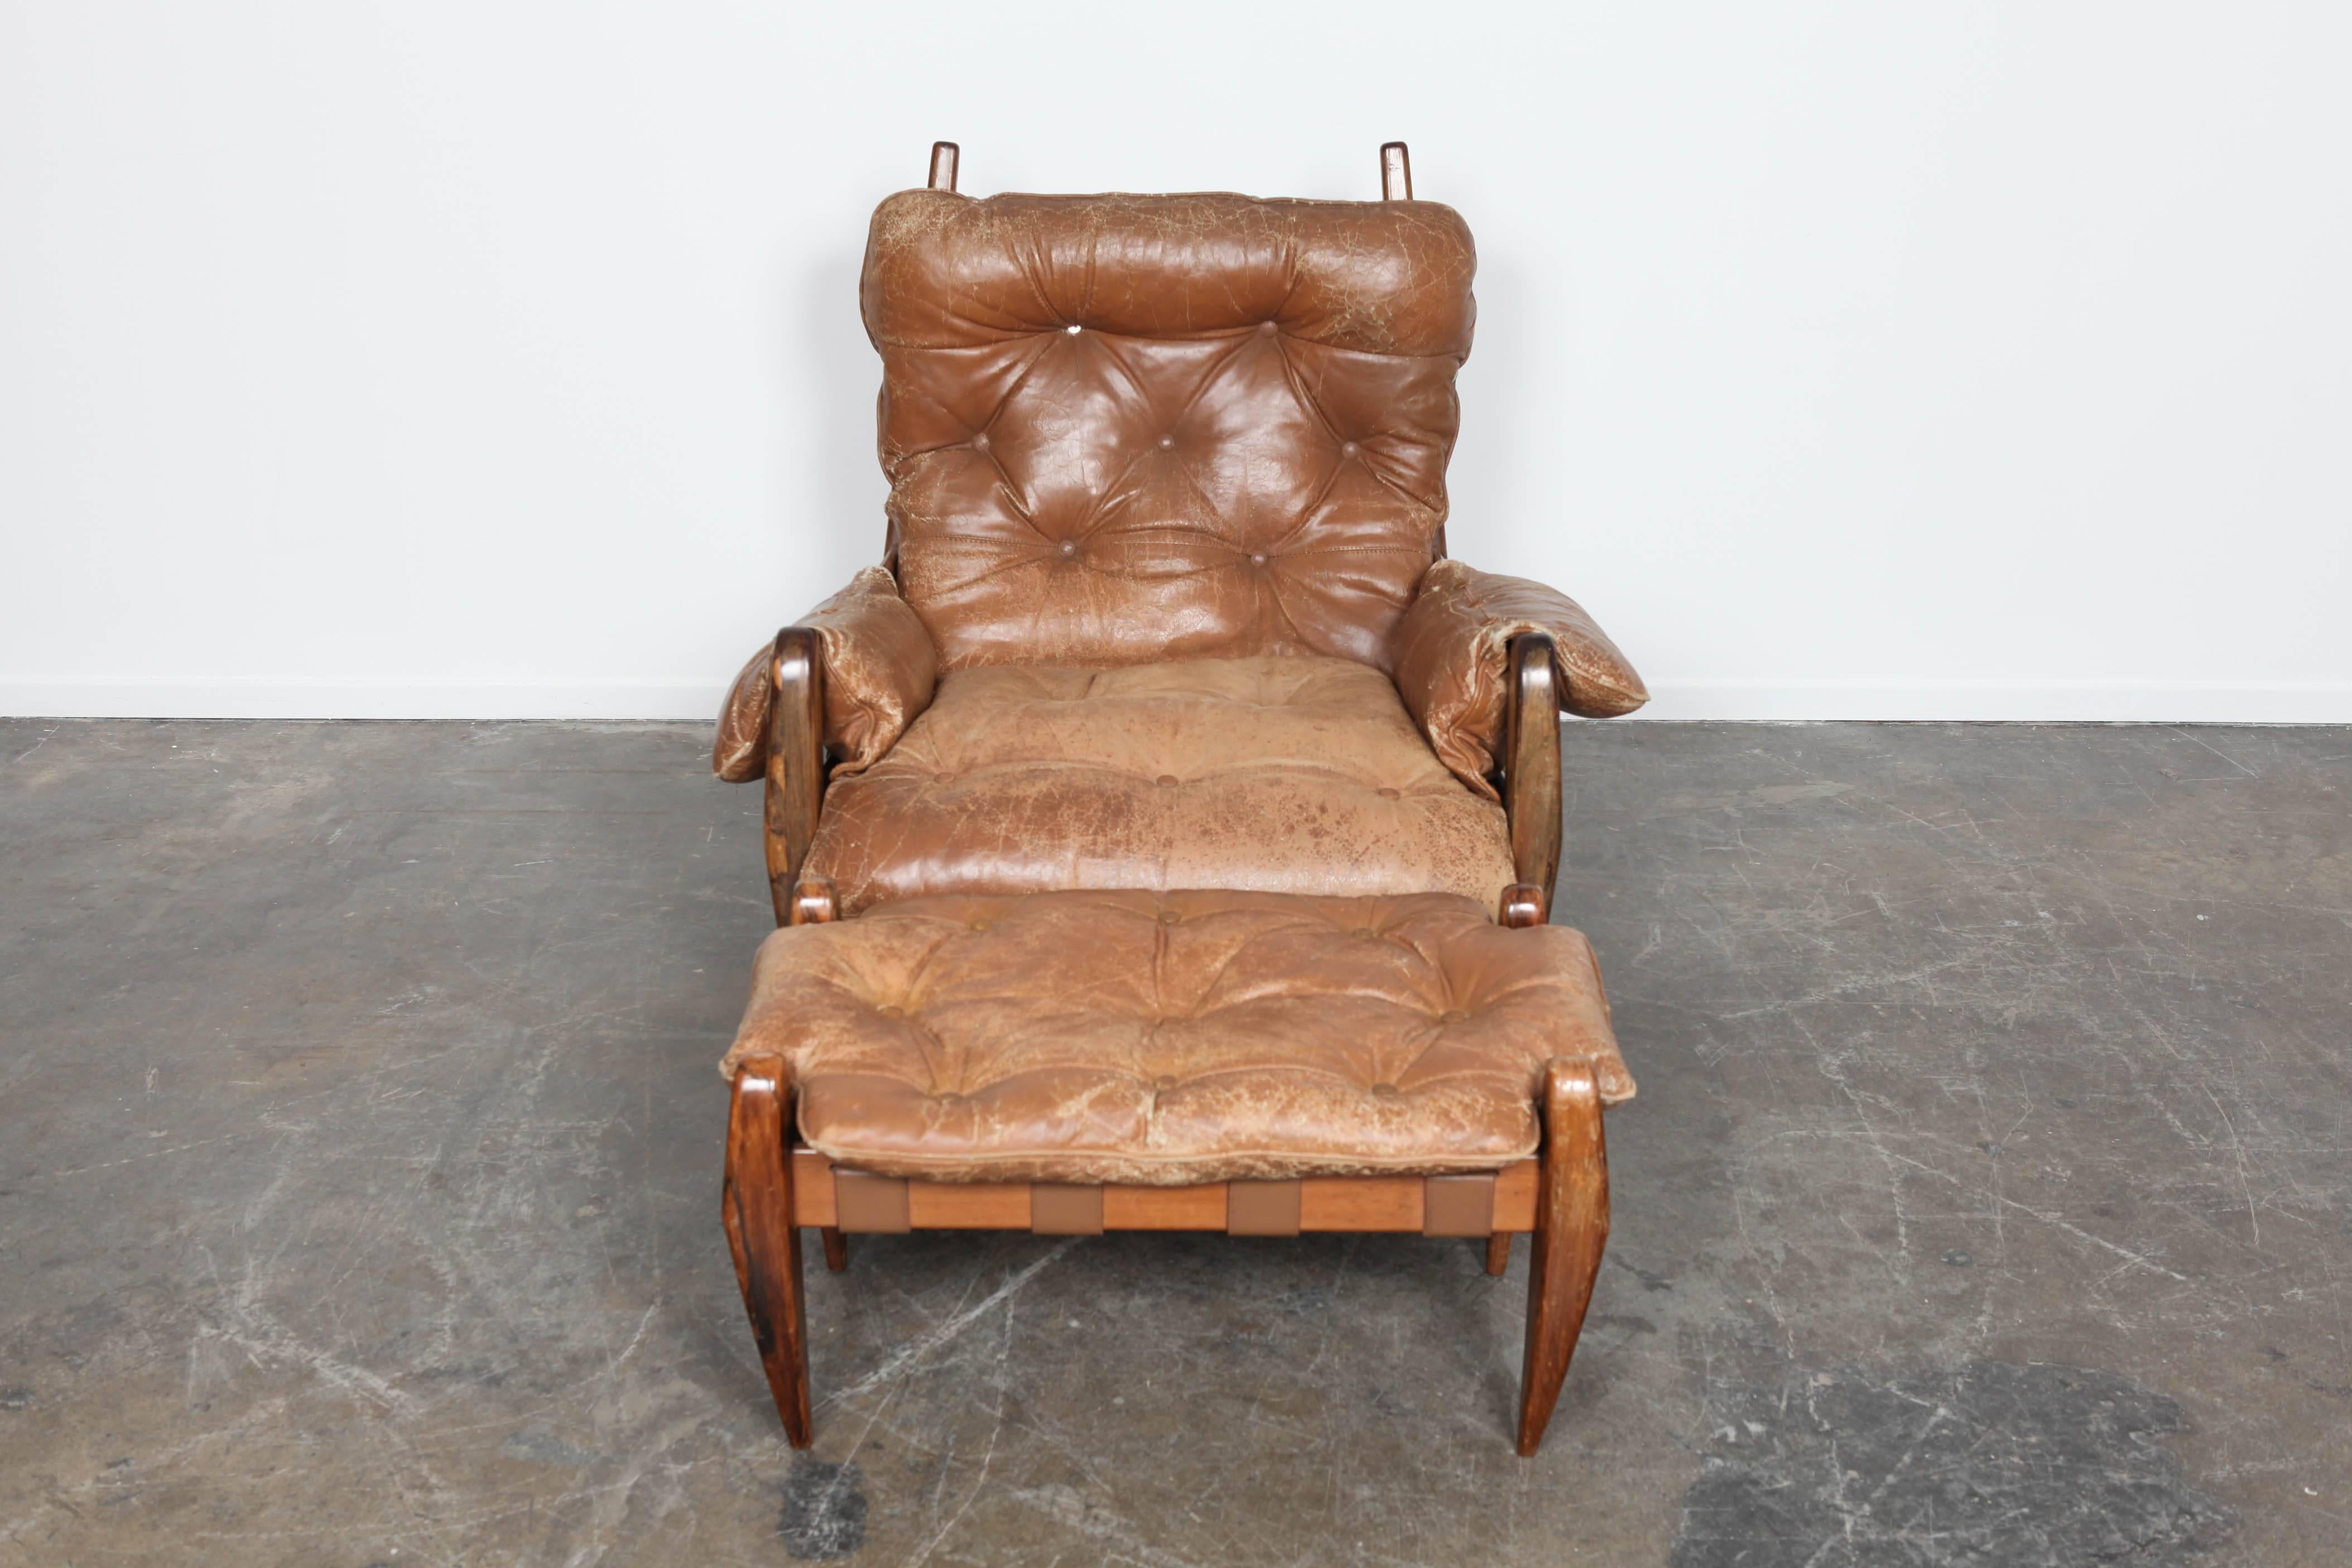 Jacaranda rosewood chair with ottoman by Jean Gillon. Made in Brazil, circa 1960s. Original tan leather upholster.
 